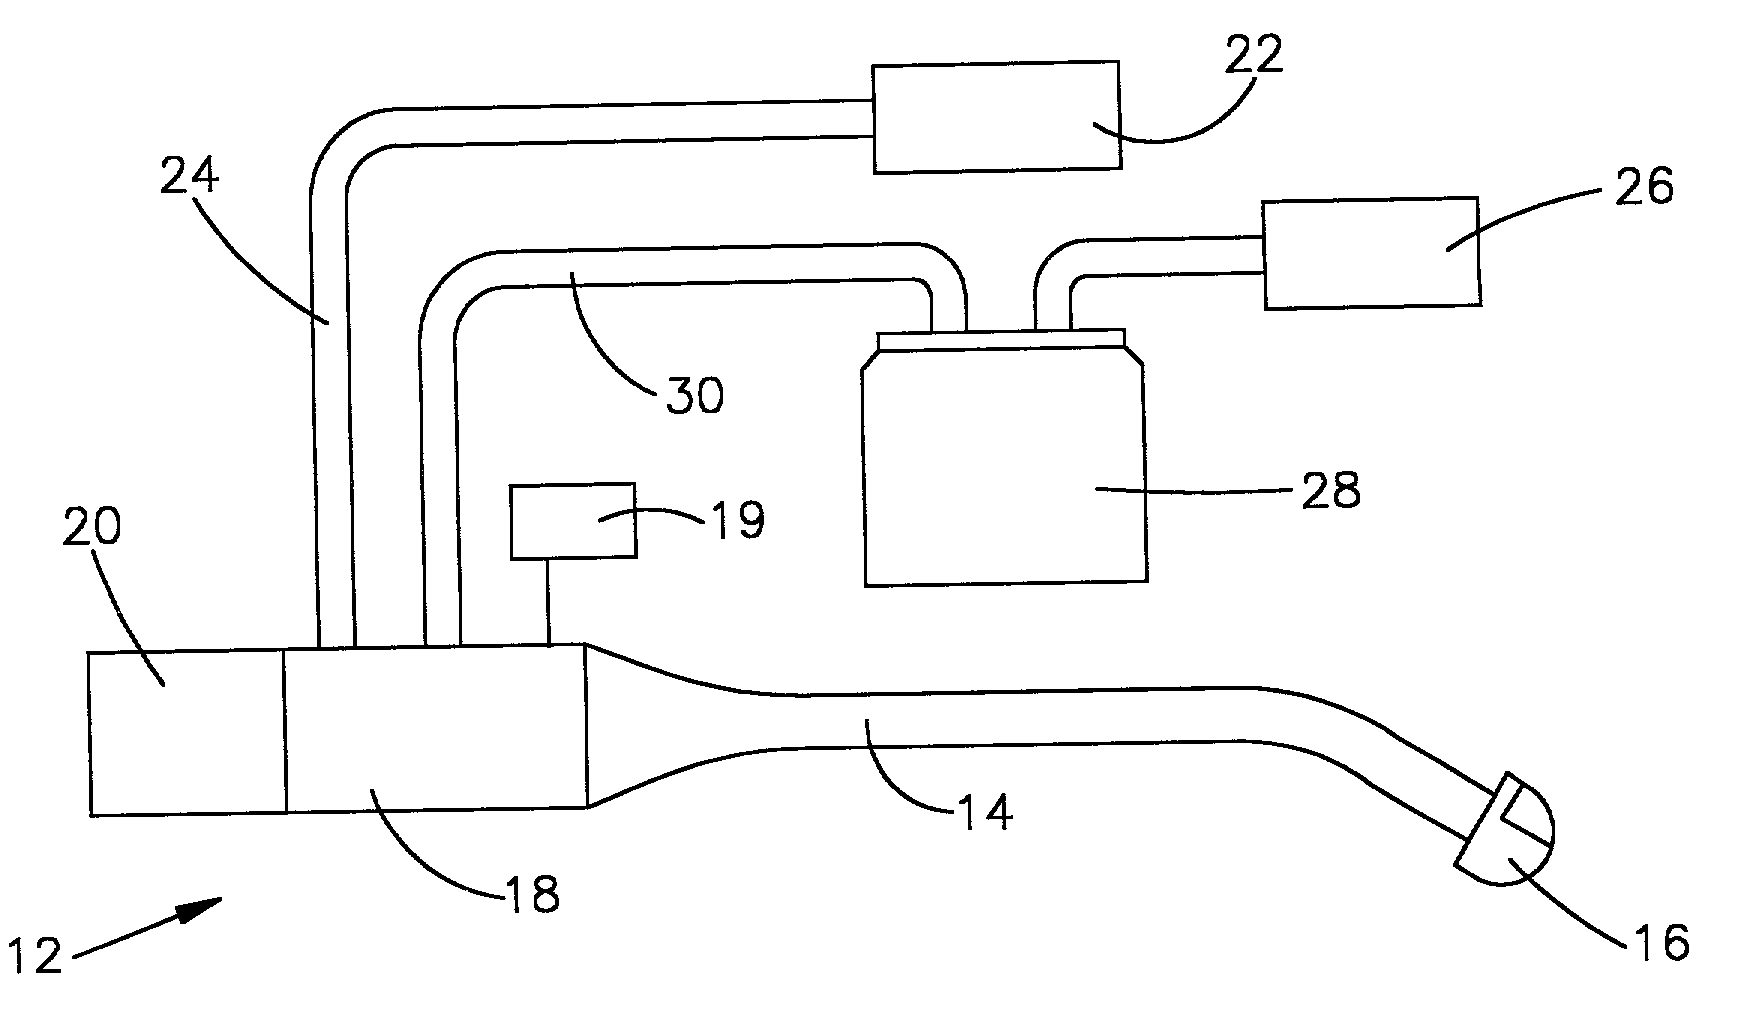 Apparatus and method for tissue removal